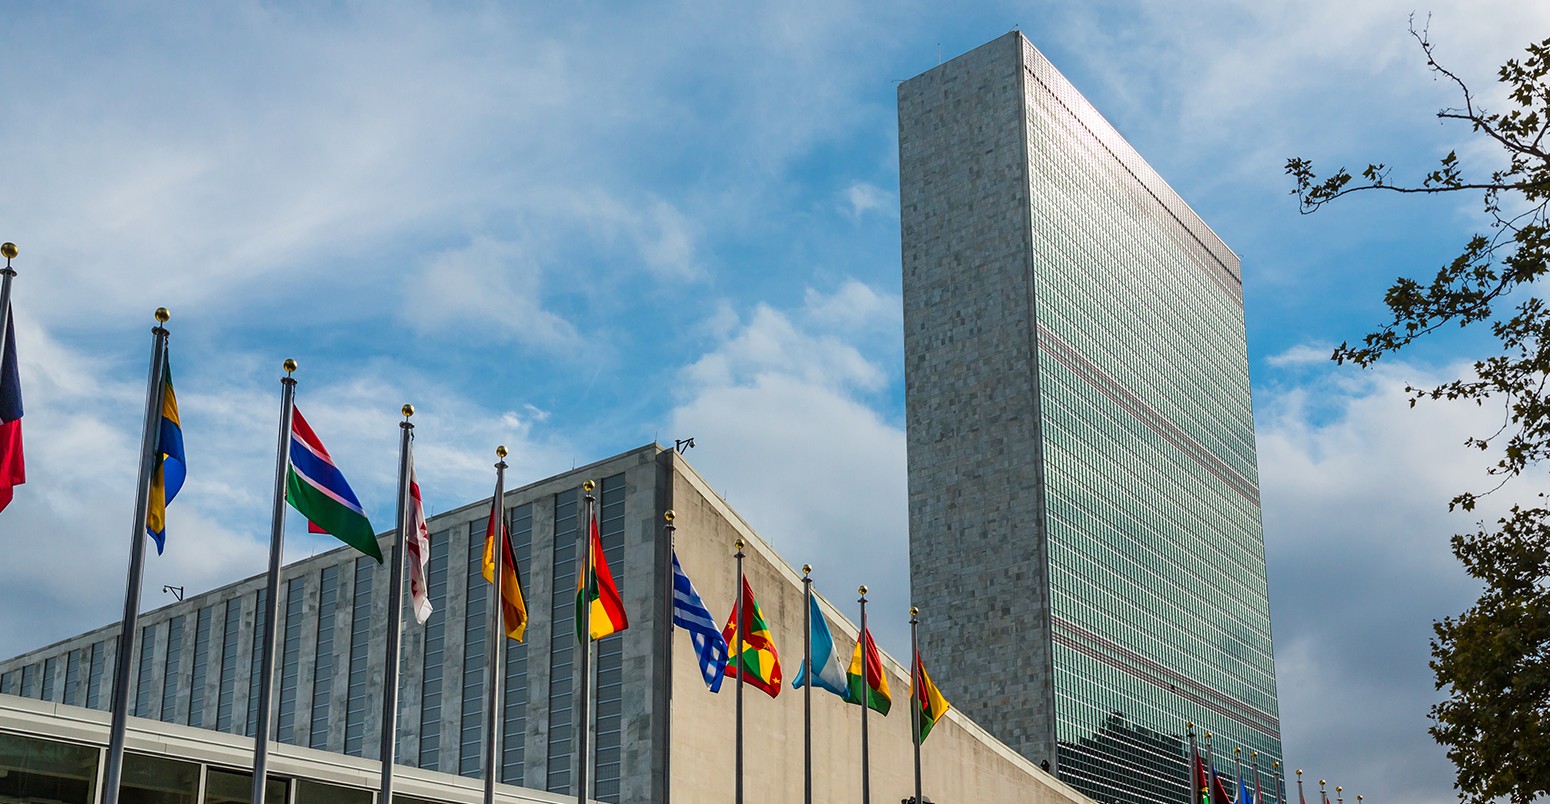 United Nations Building in New York